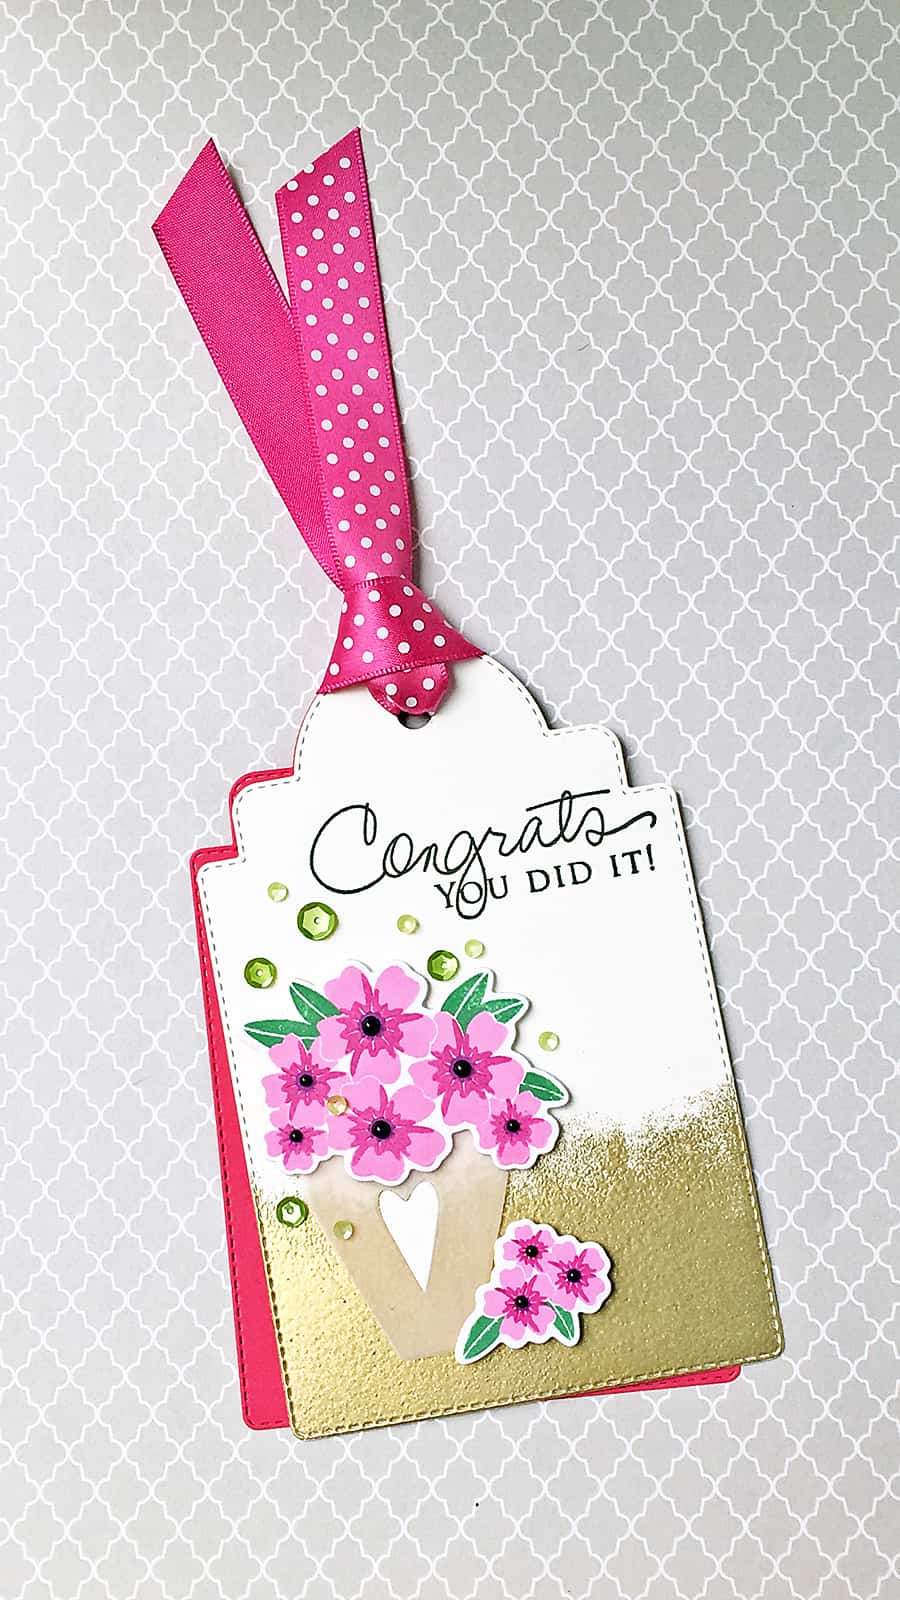 Floral Congrats Tag - Stamped images from Papertrey Ink, altered coffee mug die from Simon Says Stamp. To create the gold finish, swipe your watermark ink across the bottom of the tag, dip in gold embossing powder and heat!